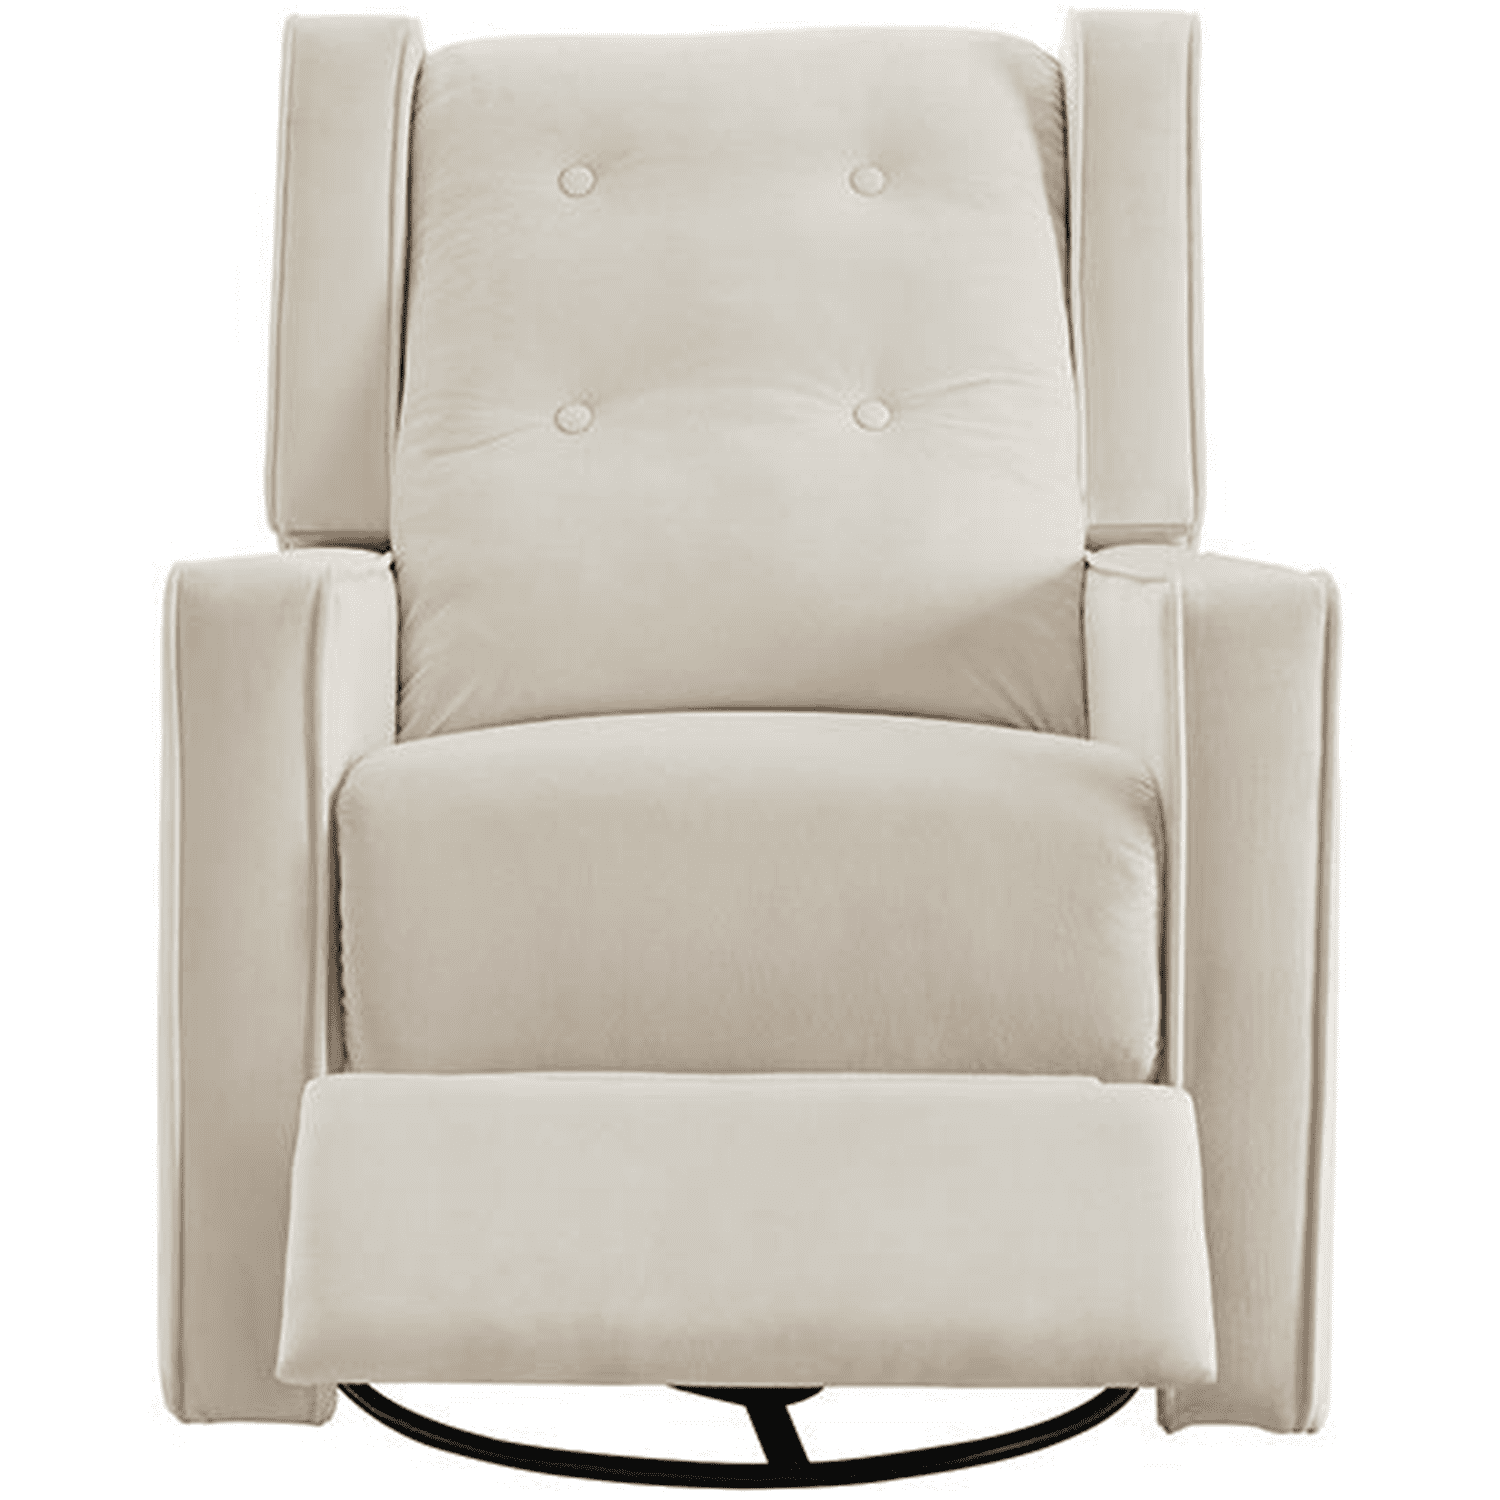 Dropship Rocking Recliner Chair,360 Degree Swivel Nursery Rocking  Chair,Glider Chair,Modern Small Rocking Swivel Recliner Chair For  Bedroom,Living Room Chair Home Theater Seat,Side Pocket(Light Gray) to Sell  Online at a Lower Price